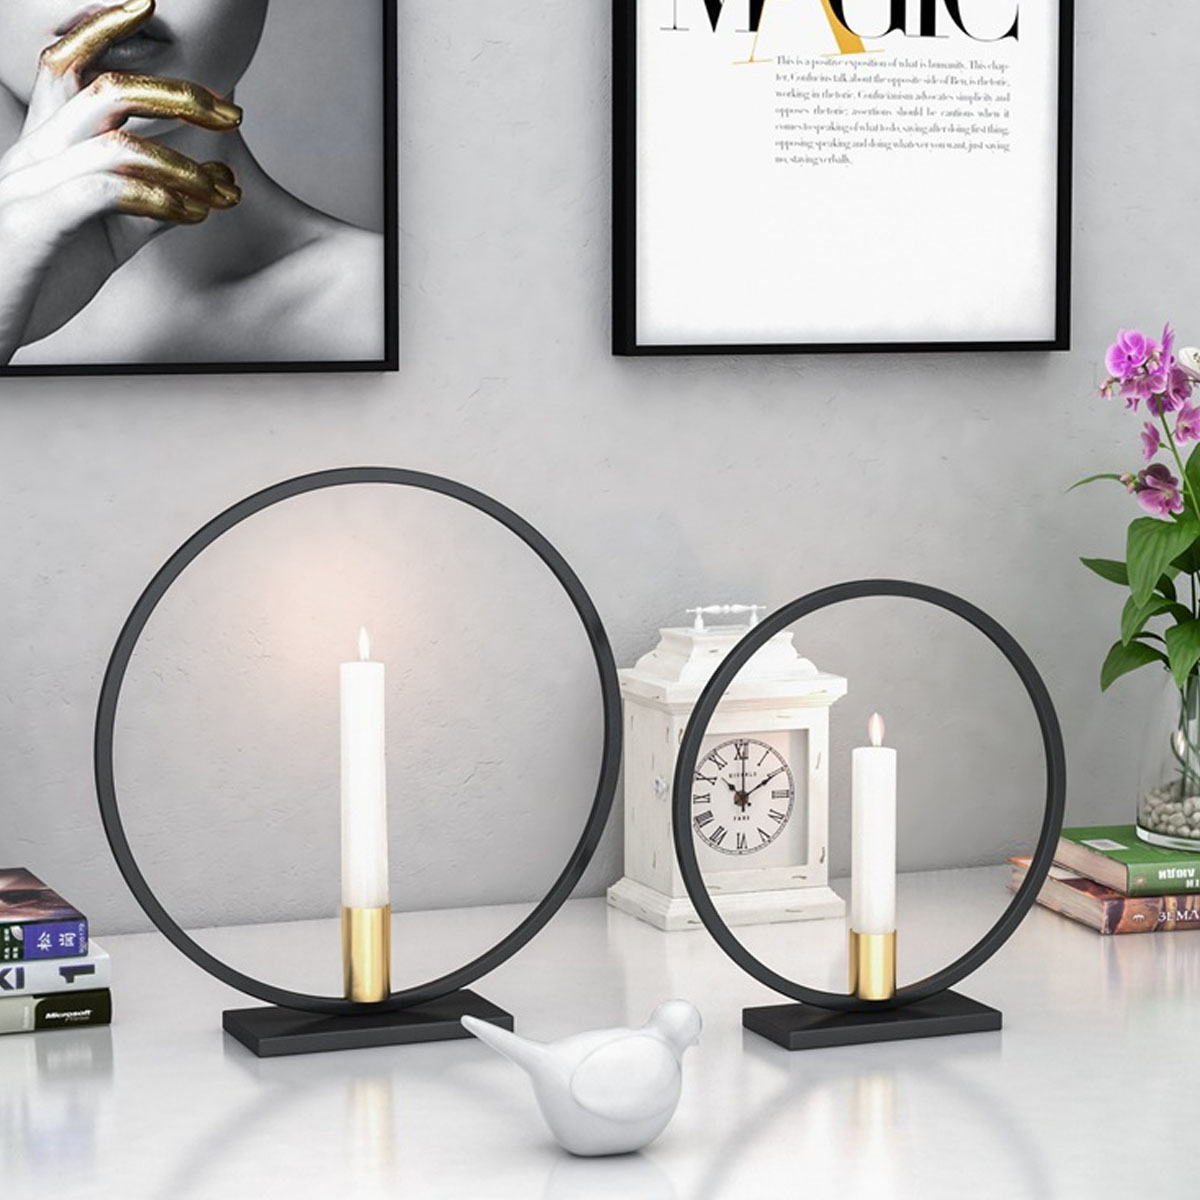 Nordic-Style-Geometric-Candlestick-Metal-Wall-Candle-Holder-Home-Wall-Decor-1476997-2